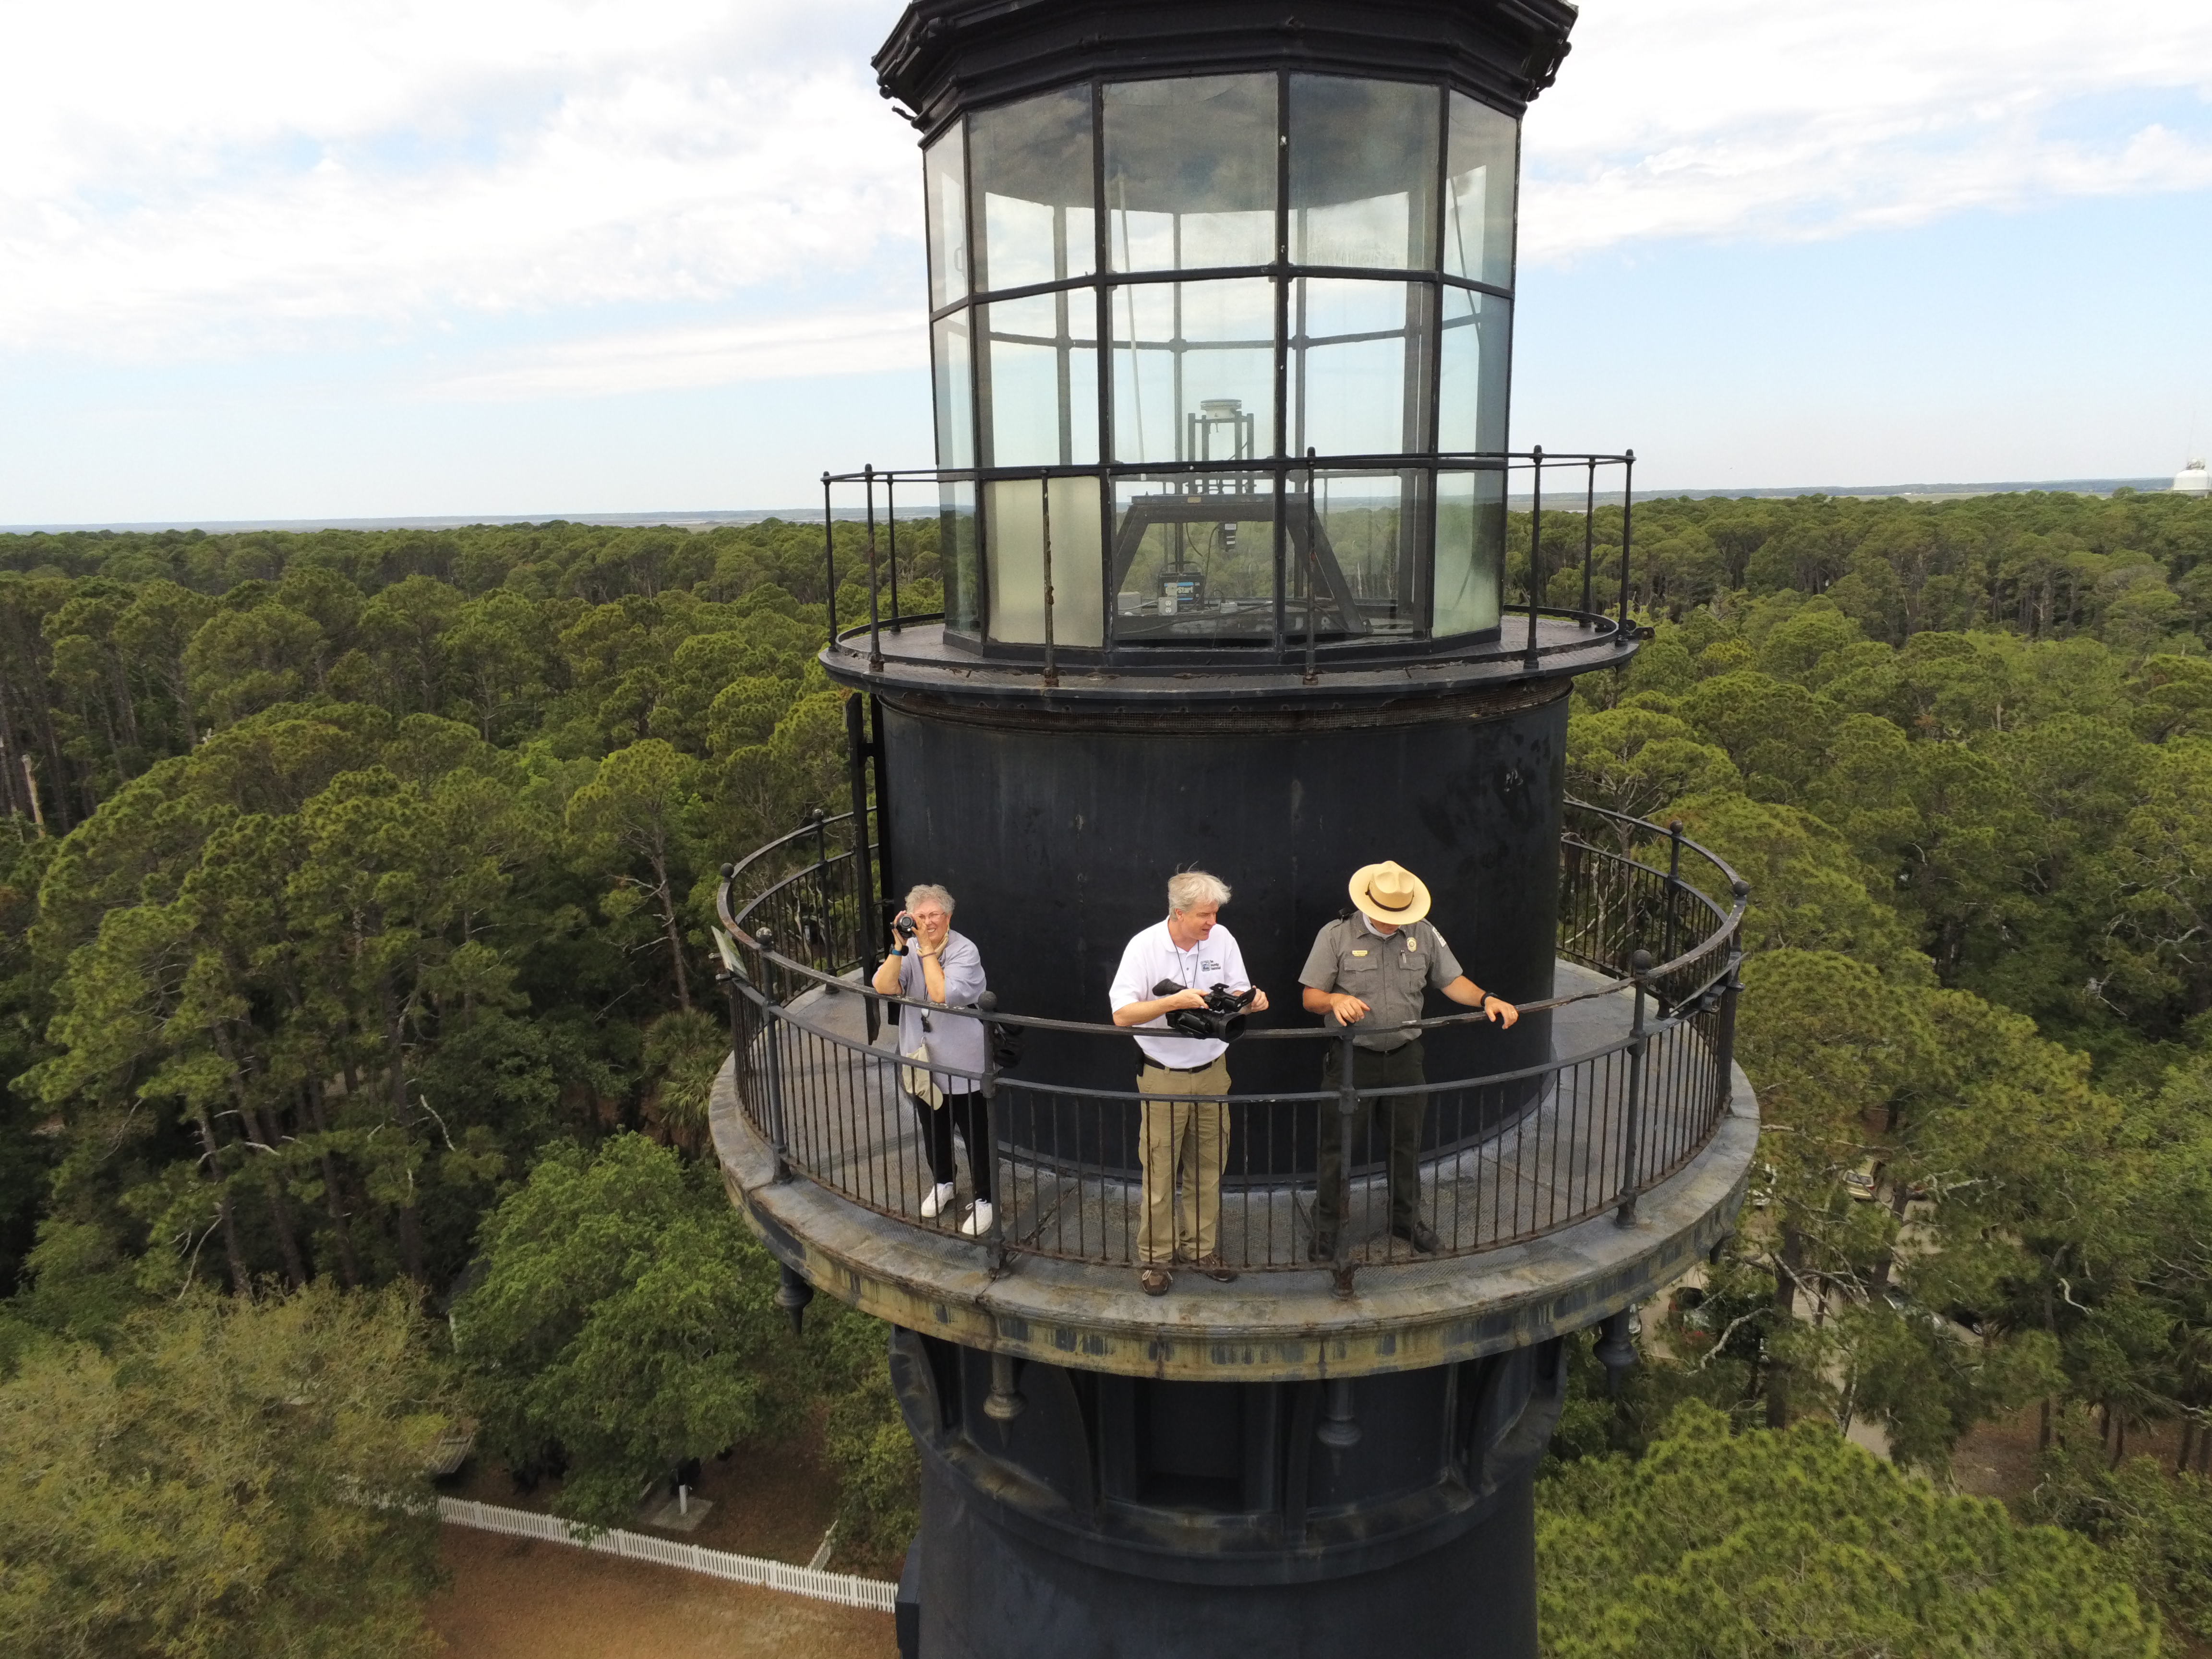 New Coastline Episode Features Hunting Island State Park